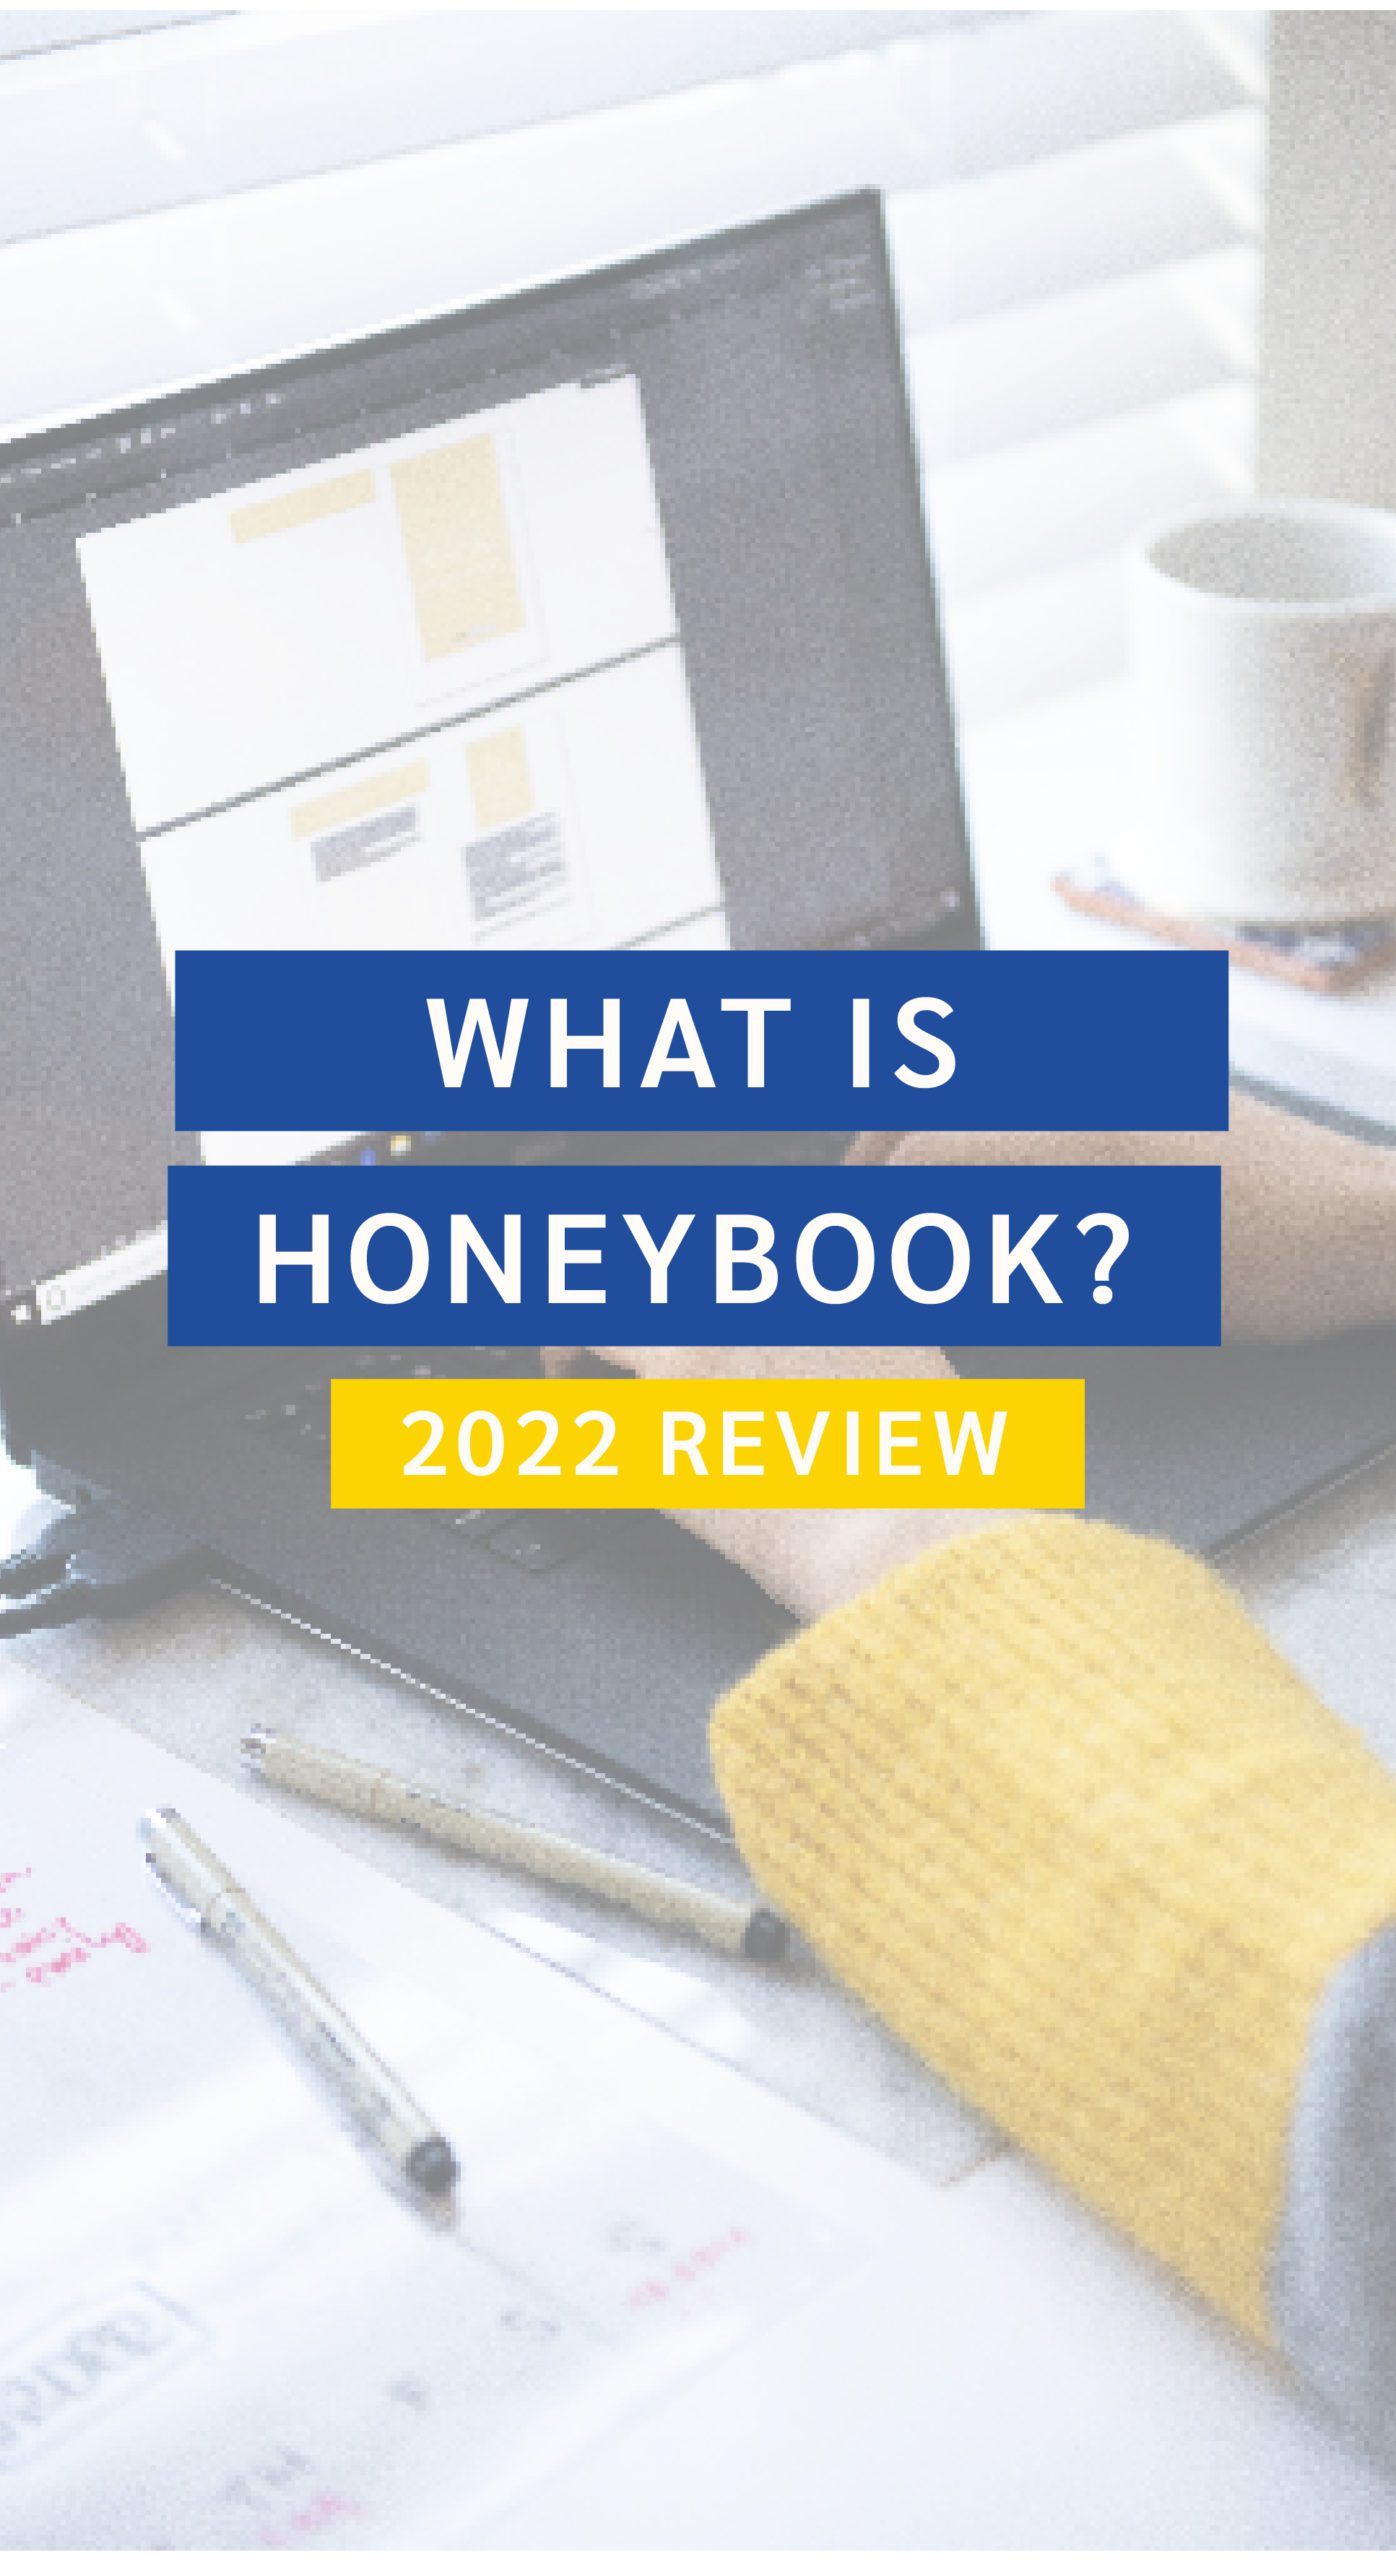 What is Honeybook?